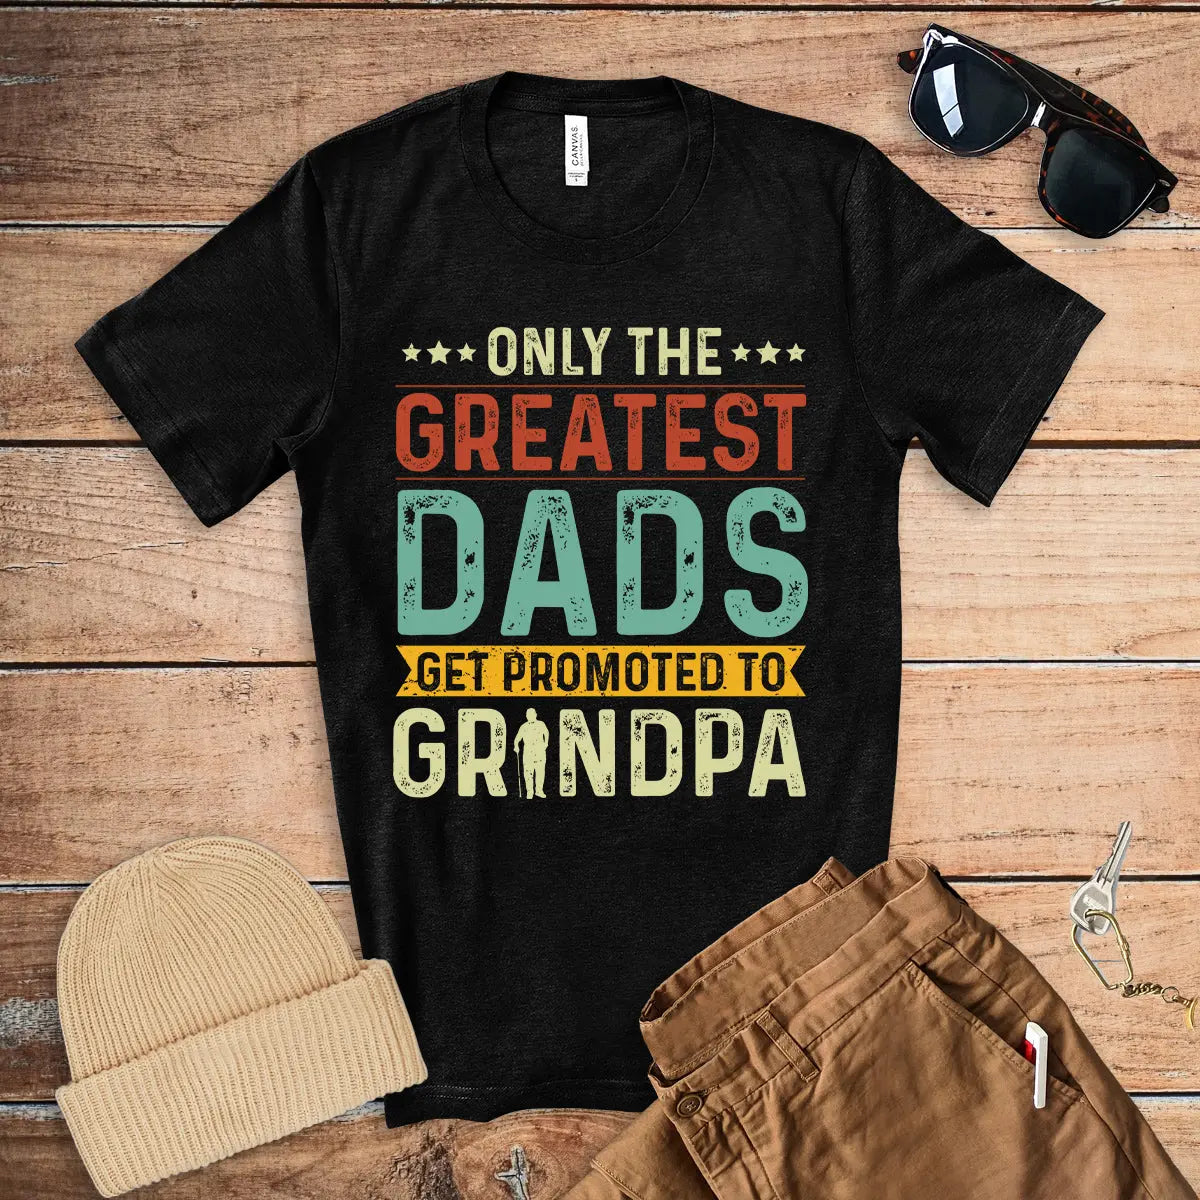 Amazing Dads Get Promoted to Grandpa Tshirt